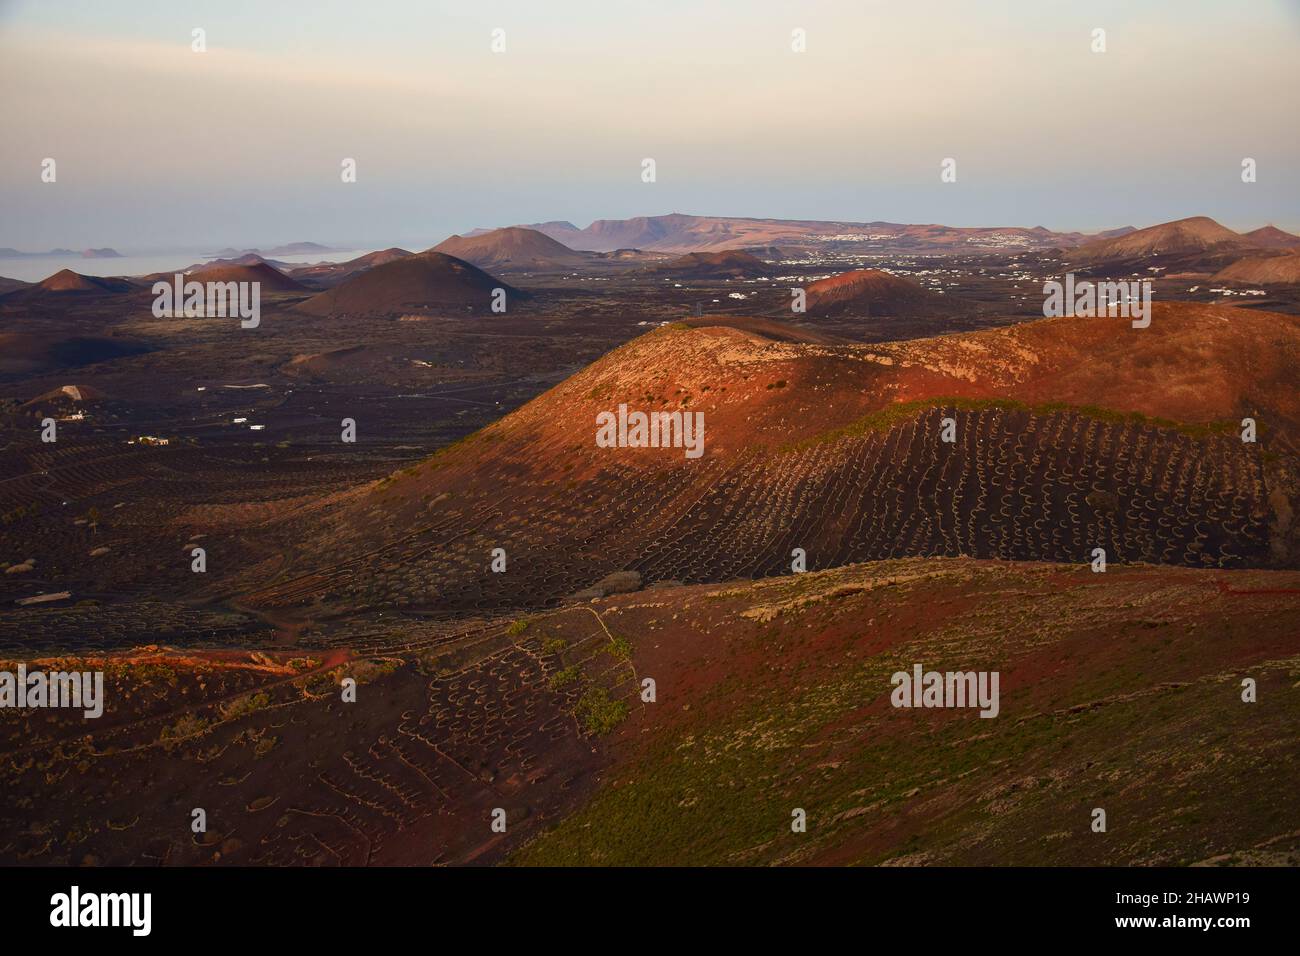 The wine-growing area of La Geria, Lanzarote at sunrise. In the background the volcanos of the Timanfaya National Park. Canary Islands, Spain. Stock Photo